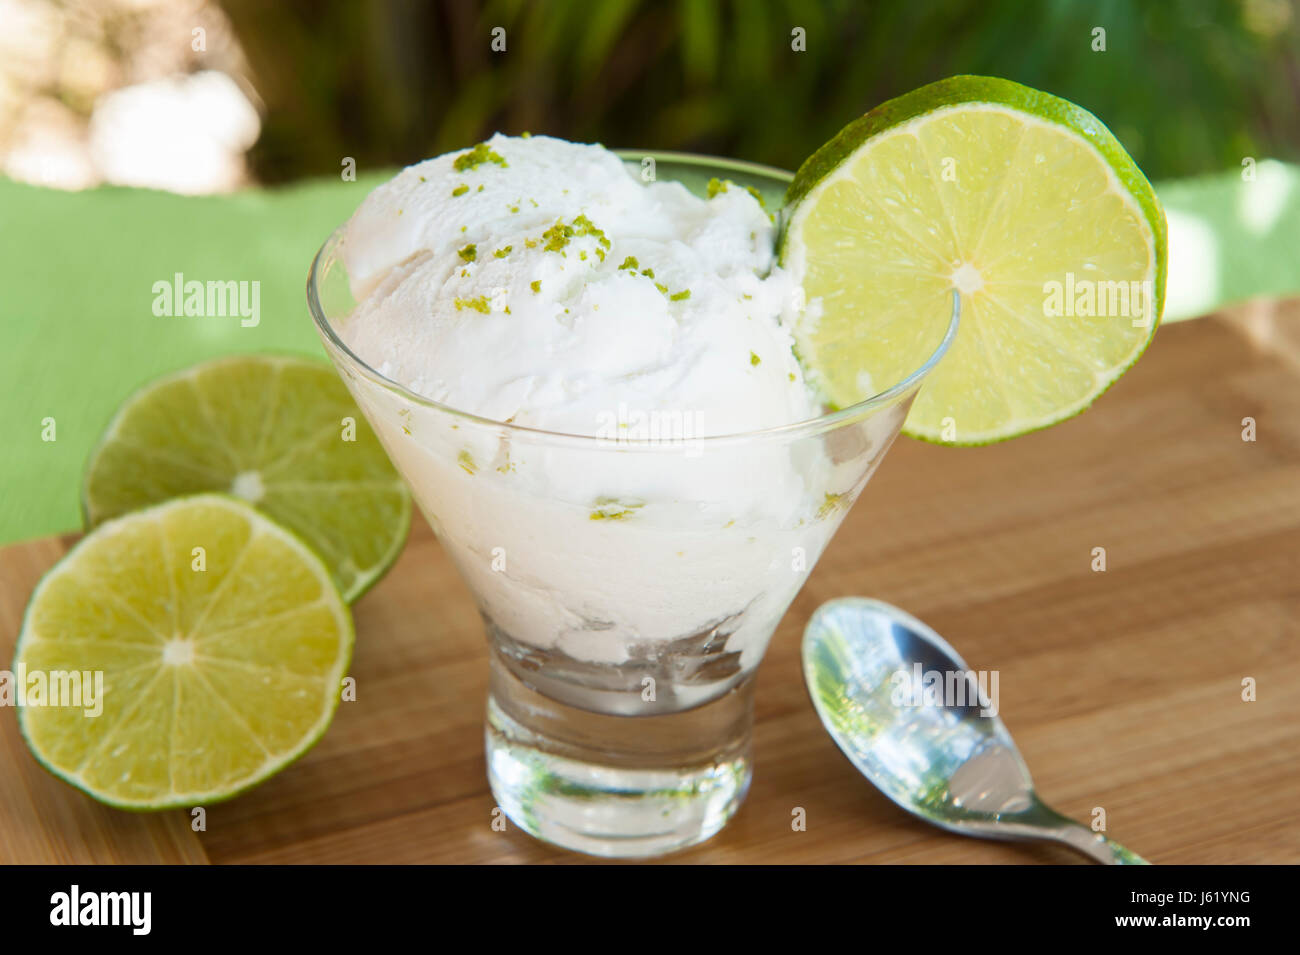 Dish of lime ice cream with lime slices served outdoors Stock Photo